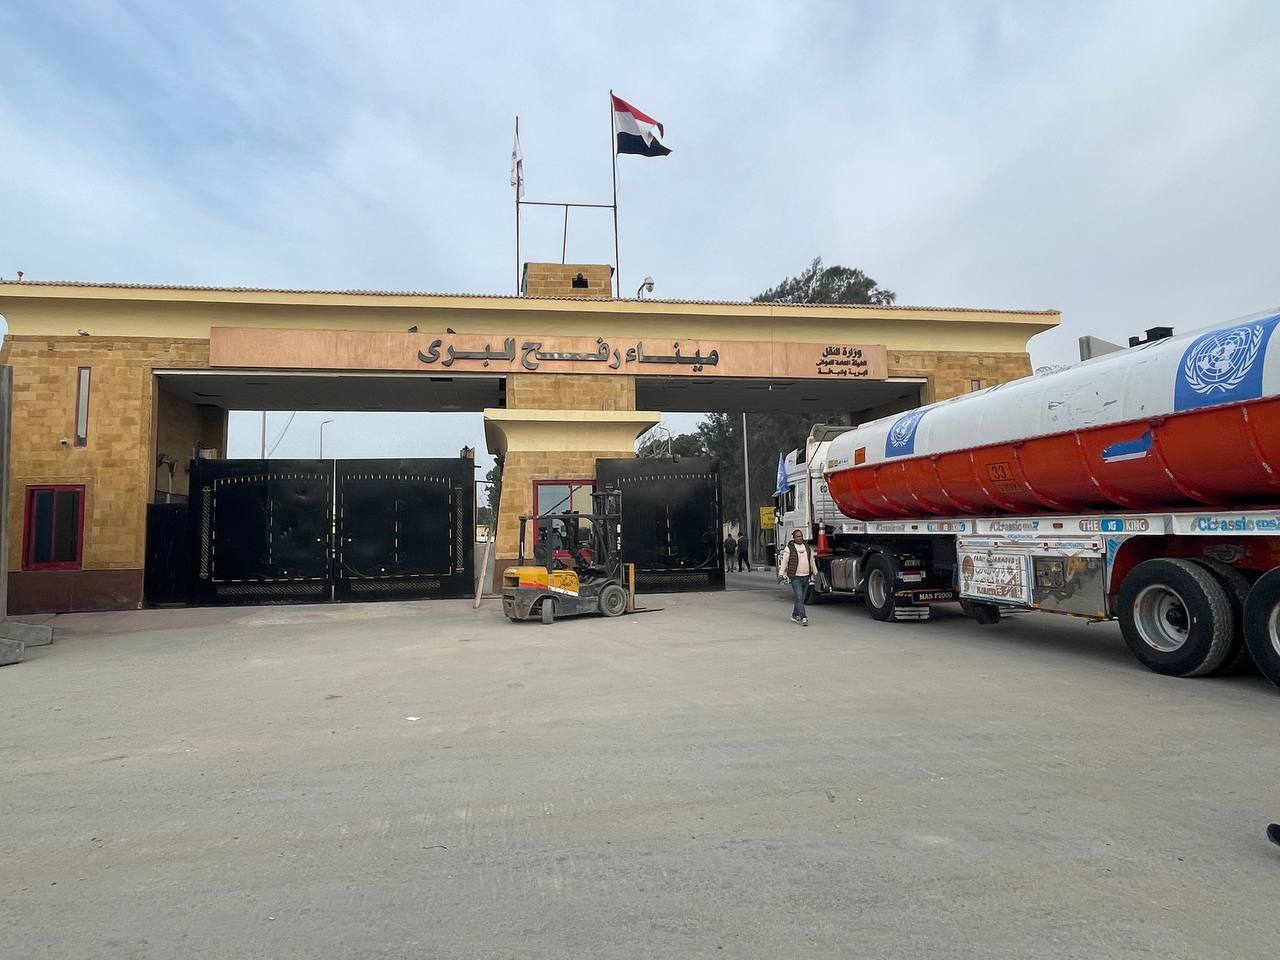 Trucks with humanitarian aid and fuel wait to enter Gaza through the Rafah border crossing in Egypt on Sunday, December 10.